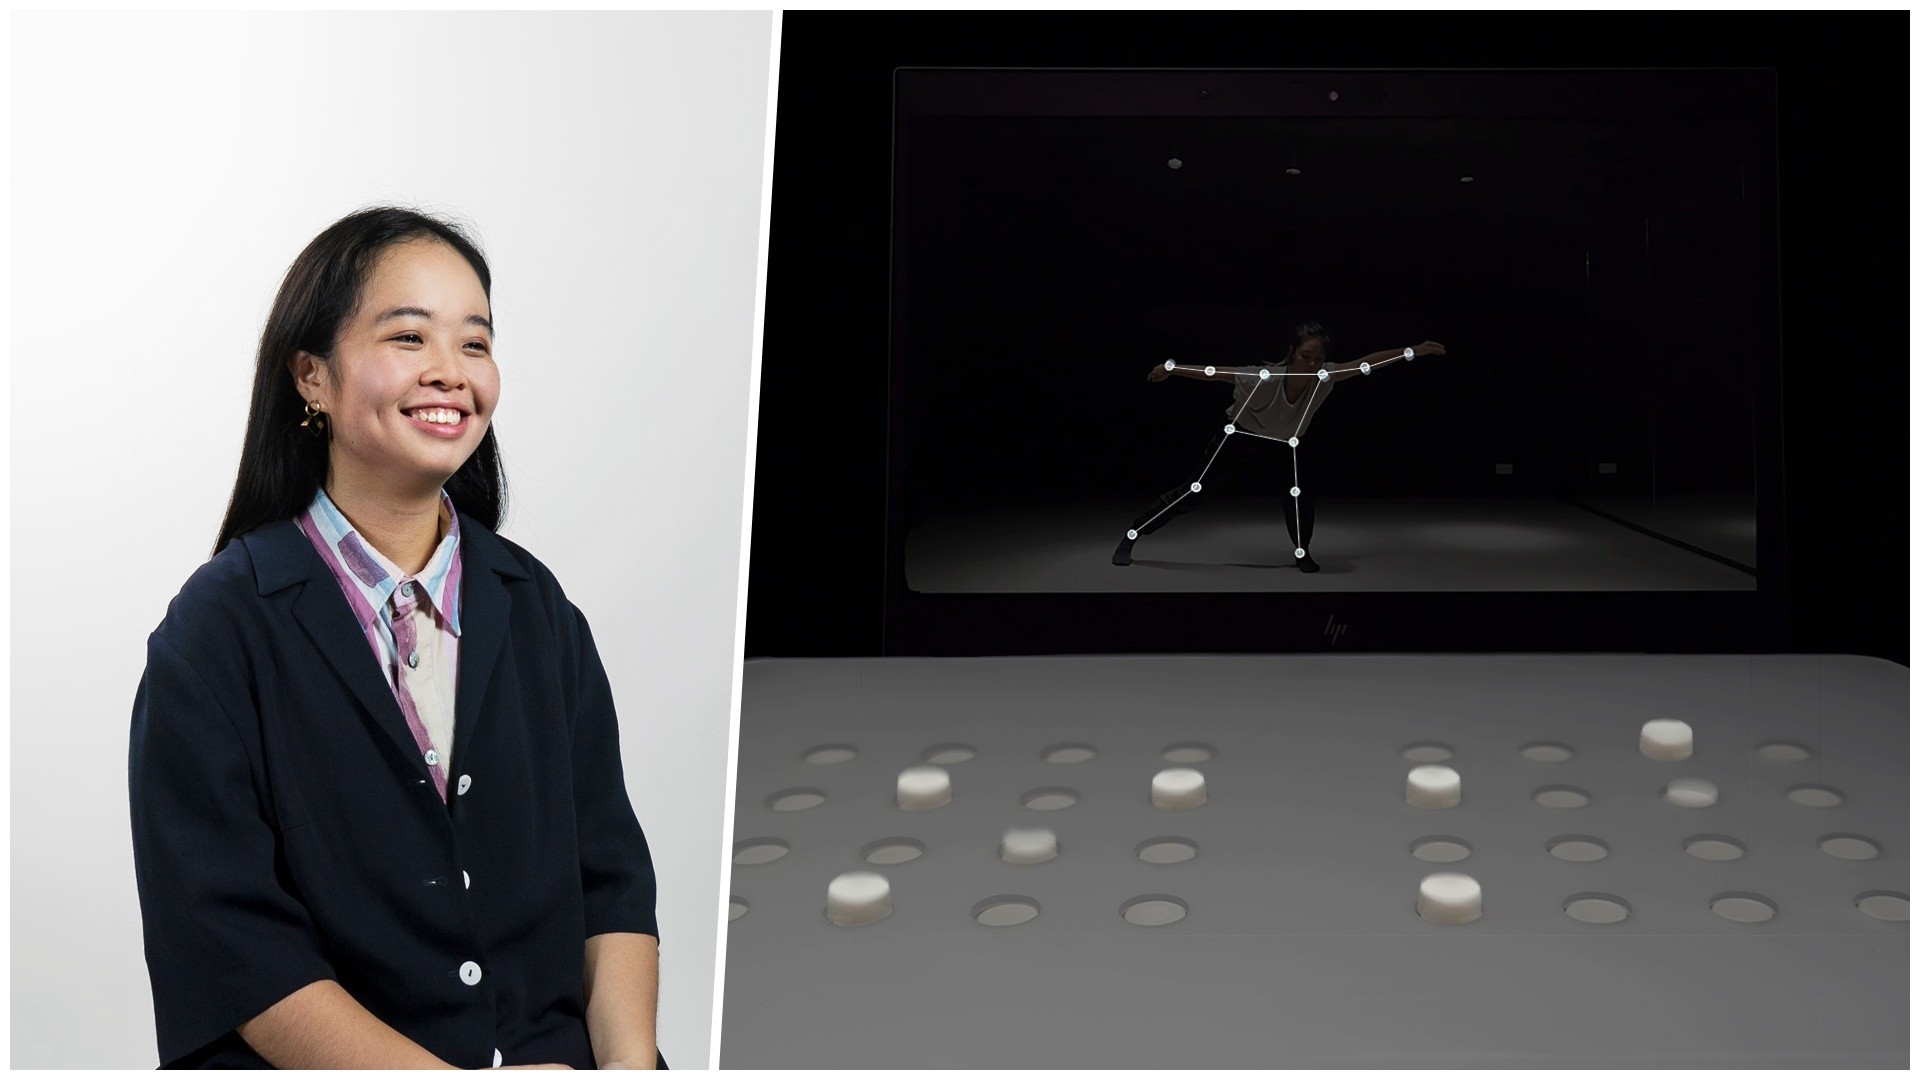 Through Kinetic Soul, Lim Shi Yun enables the visually impaired to experience dance.